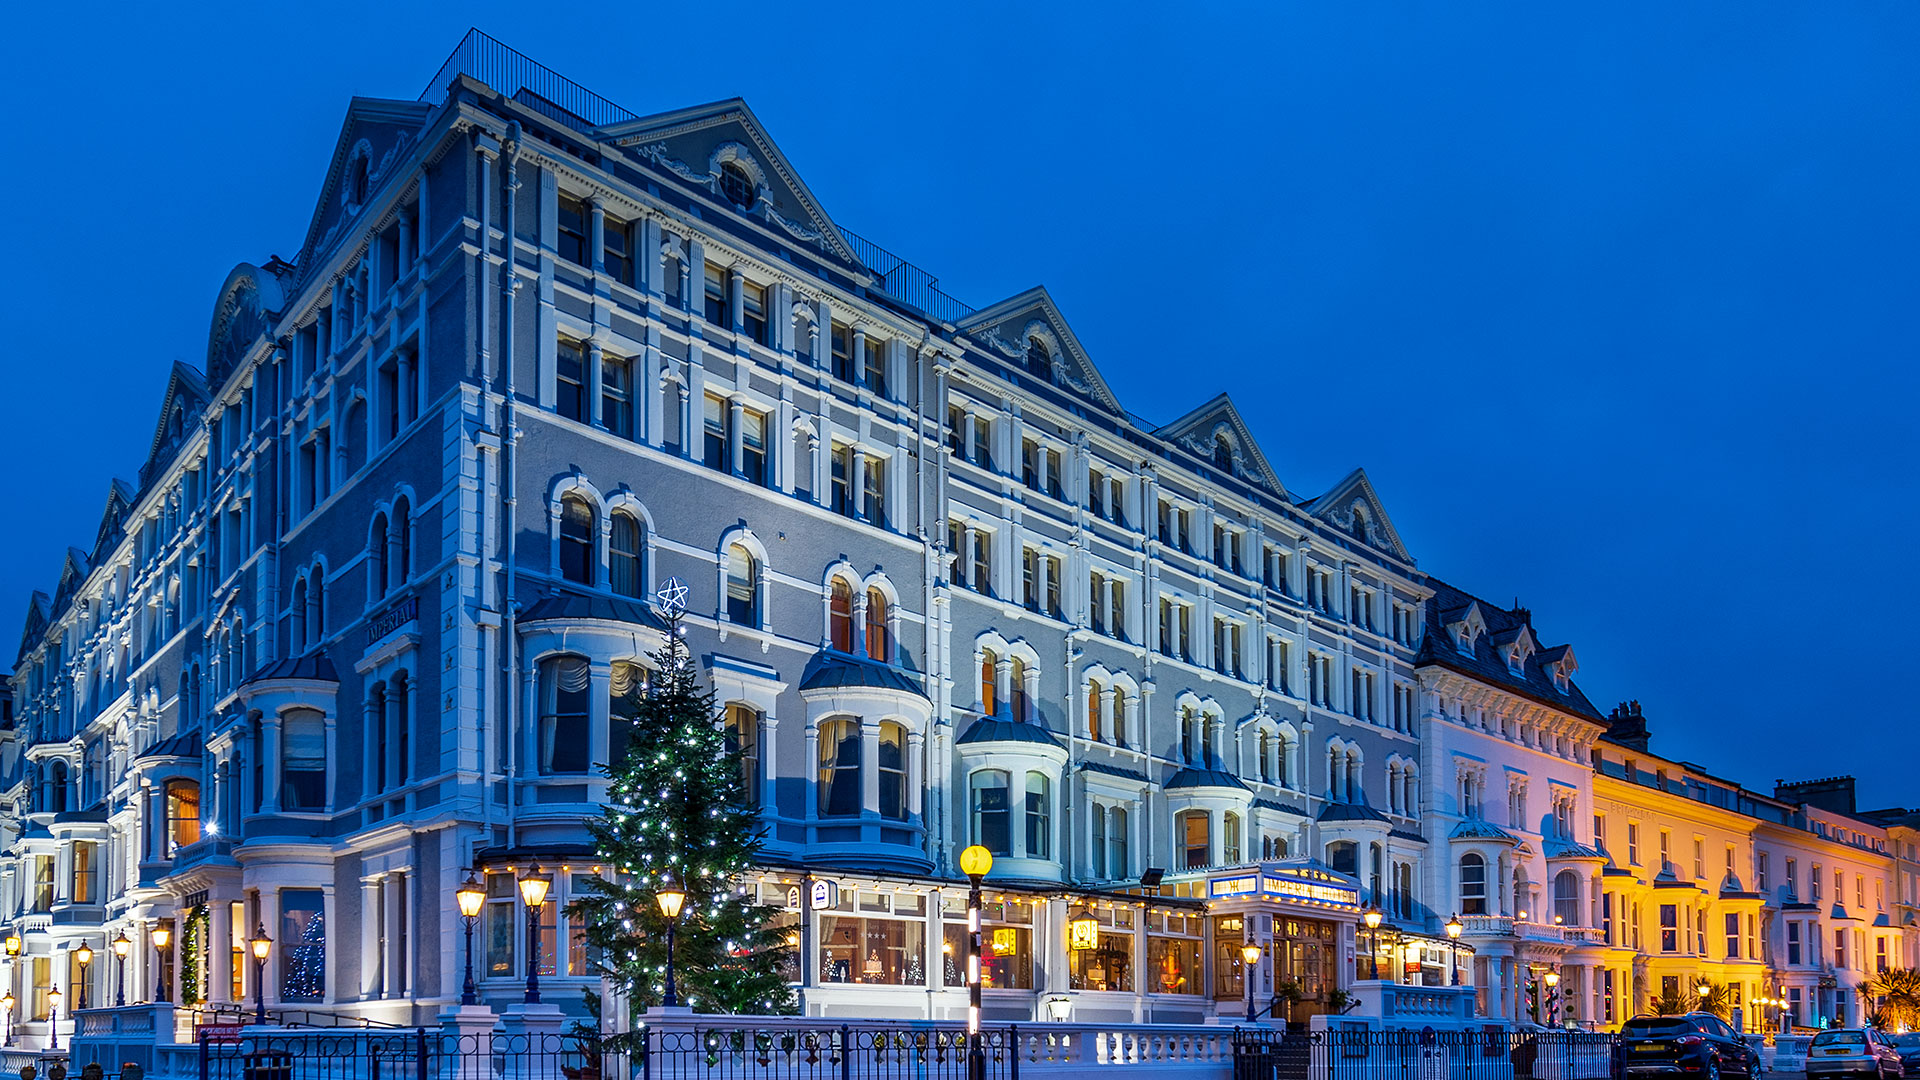 The Imperial Hotel lit up at night - Imperial Hotel, Llandudno